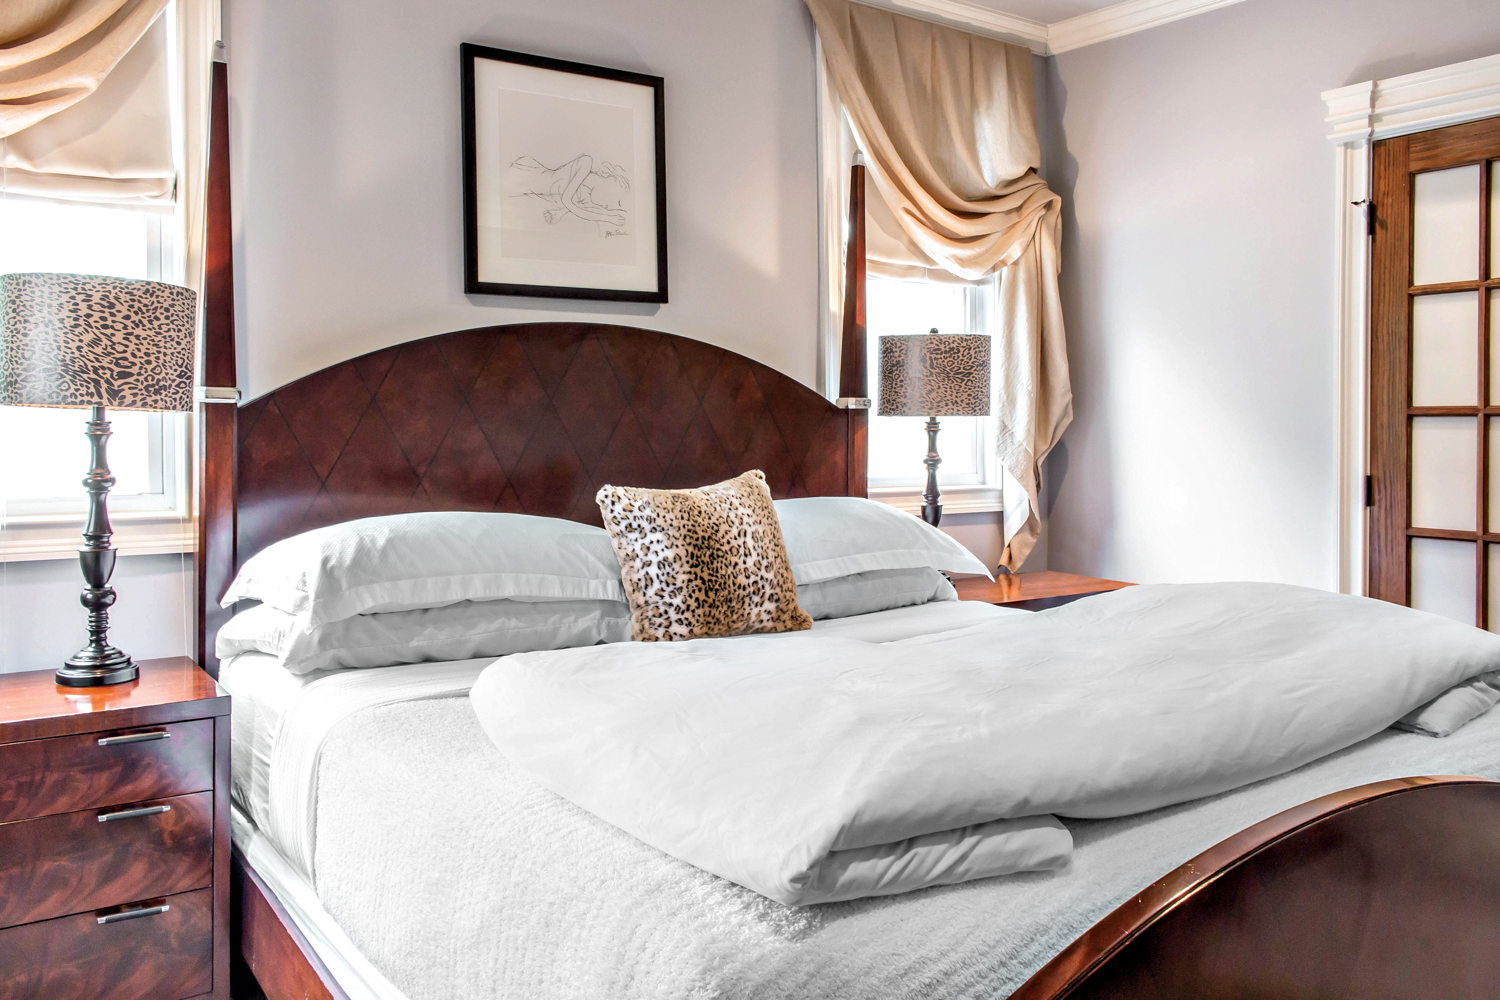 King sized bed with white bedding and wooden headboard